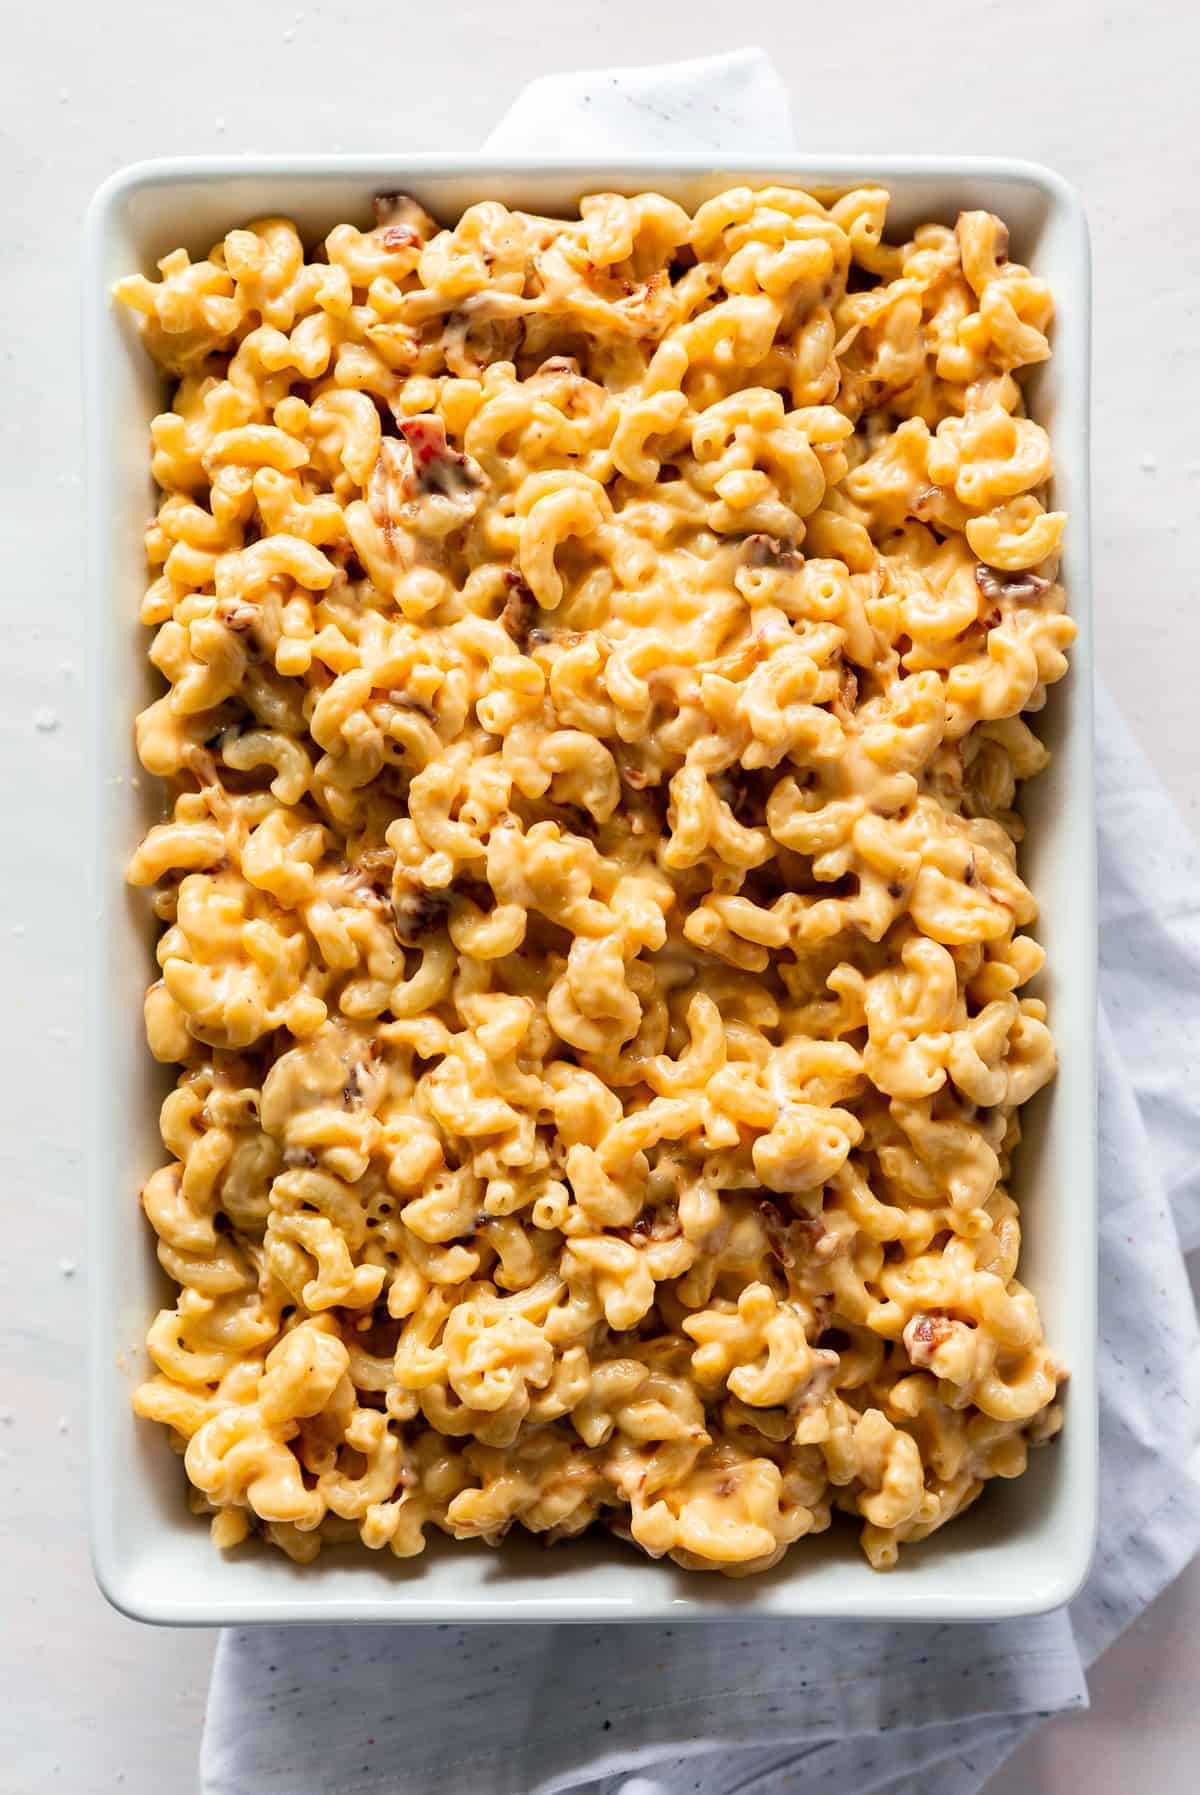 Is there anything better than bacon, caramelized onions, and cheese? According to this Creamy Baked Mac and Cheese with Bacon, absolutely not.